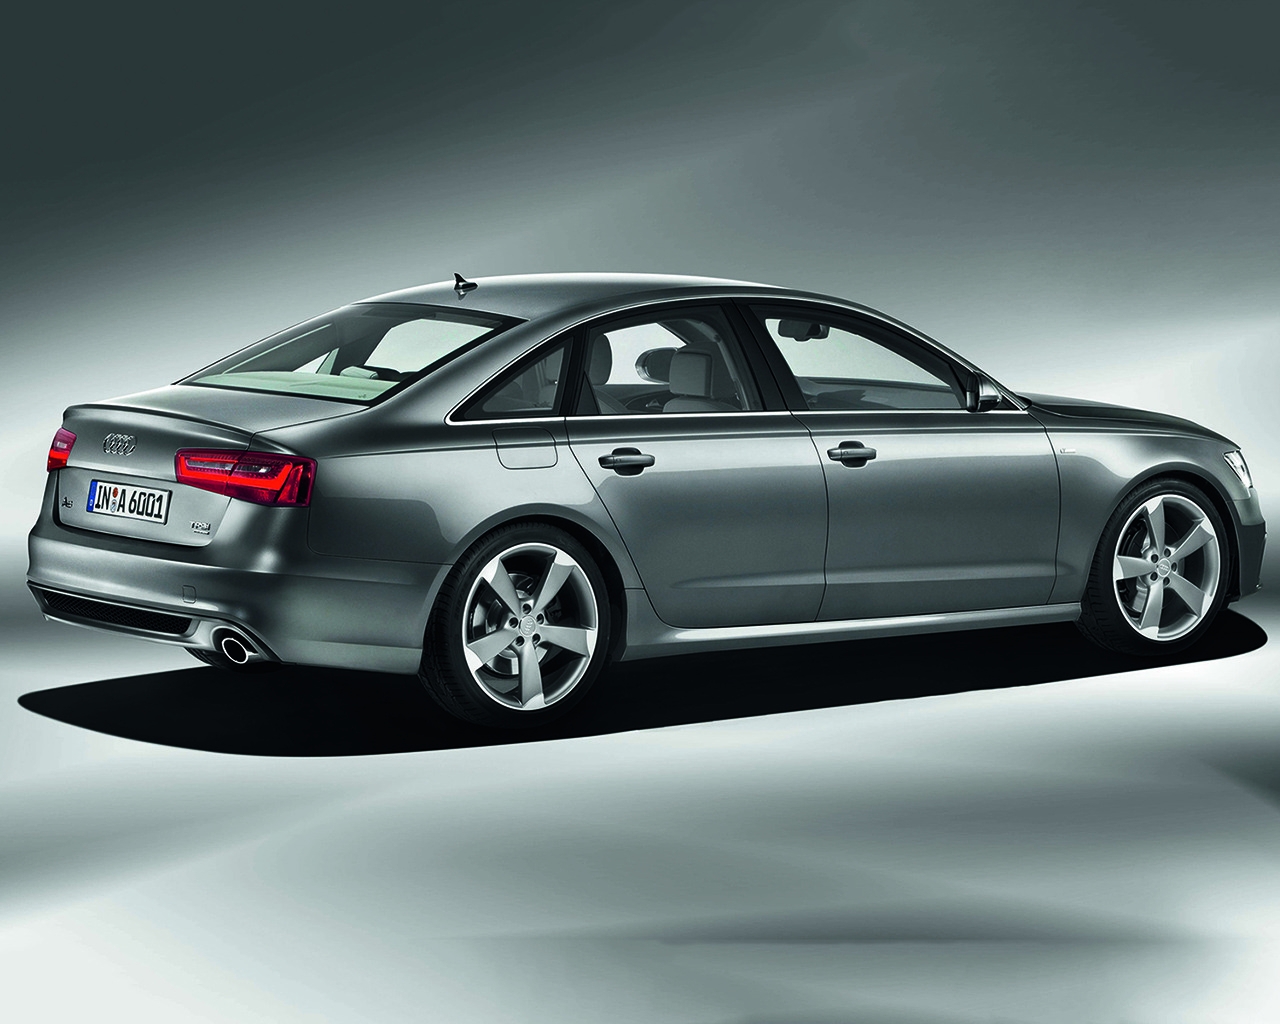 Audi A6 2012 for 1280 x 1024 resolution